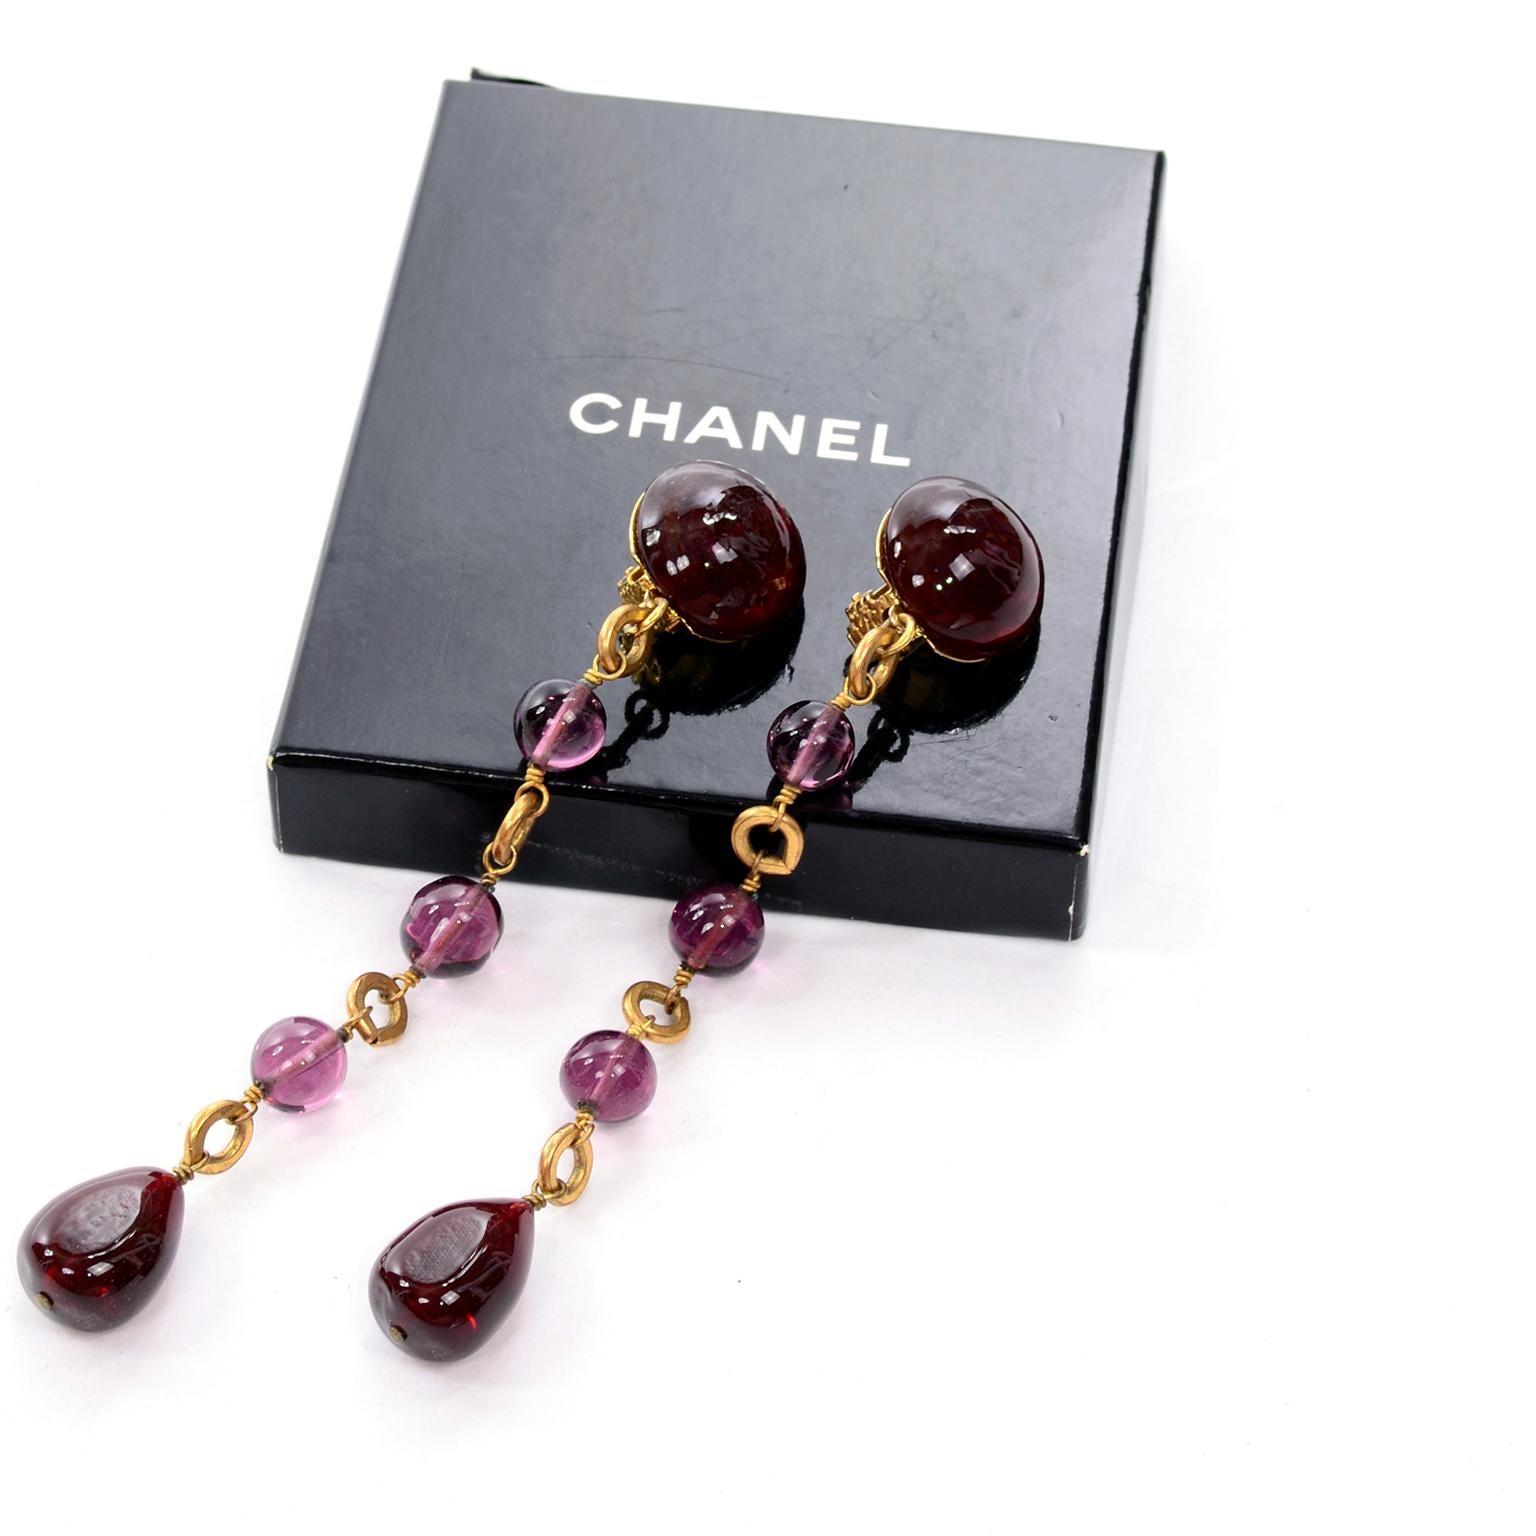 These are stunning vintage late 1980's or early 1990's Chanel clip earrings with purple gripoix stones on gold metal.  Marked Chanel made in France, these were designed during the years that Victoire de Castellane was overseeing the costume jewelry